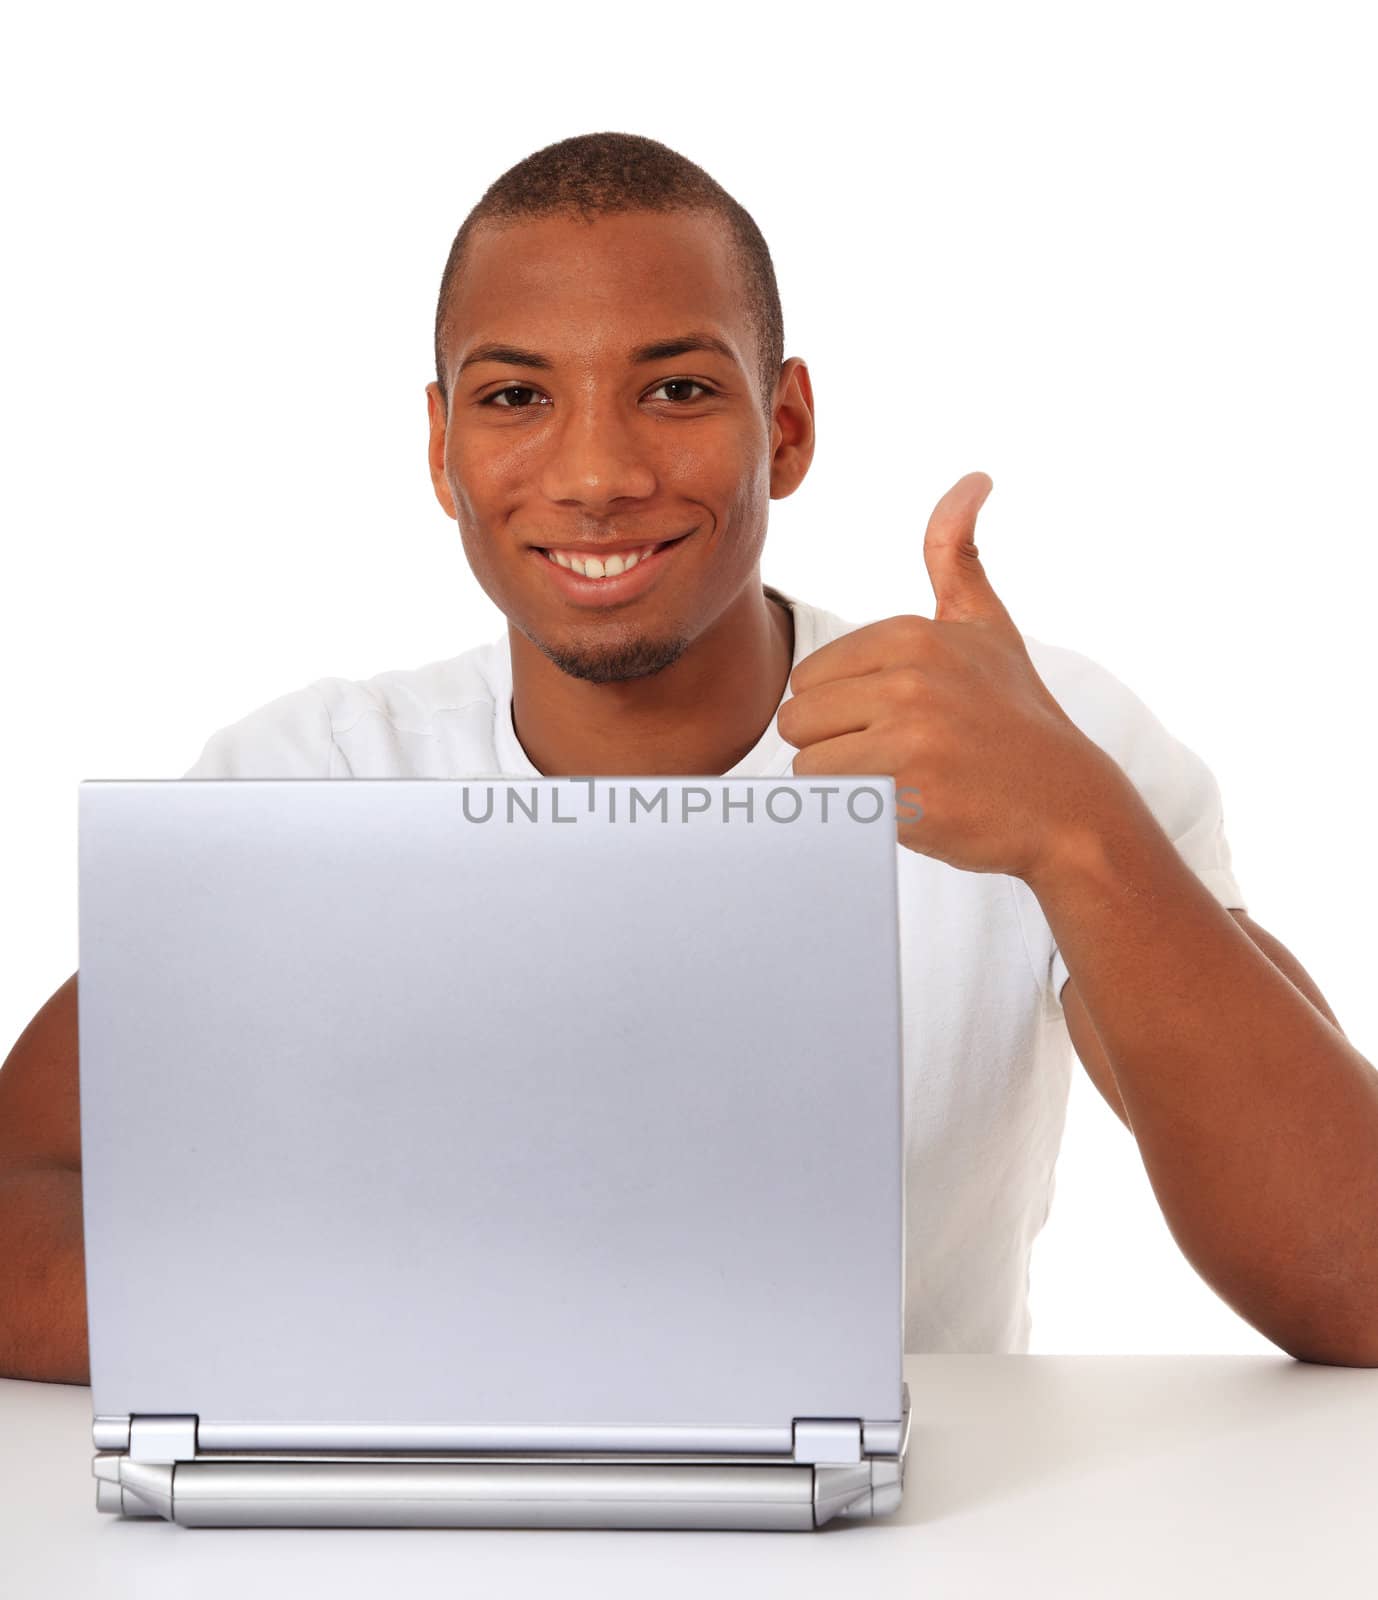 Attractive black guy showing thumbs up while using laptop. All on white background.